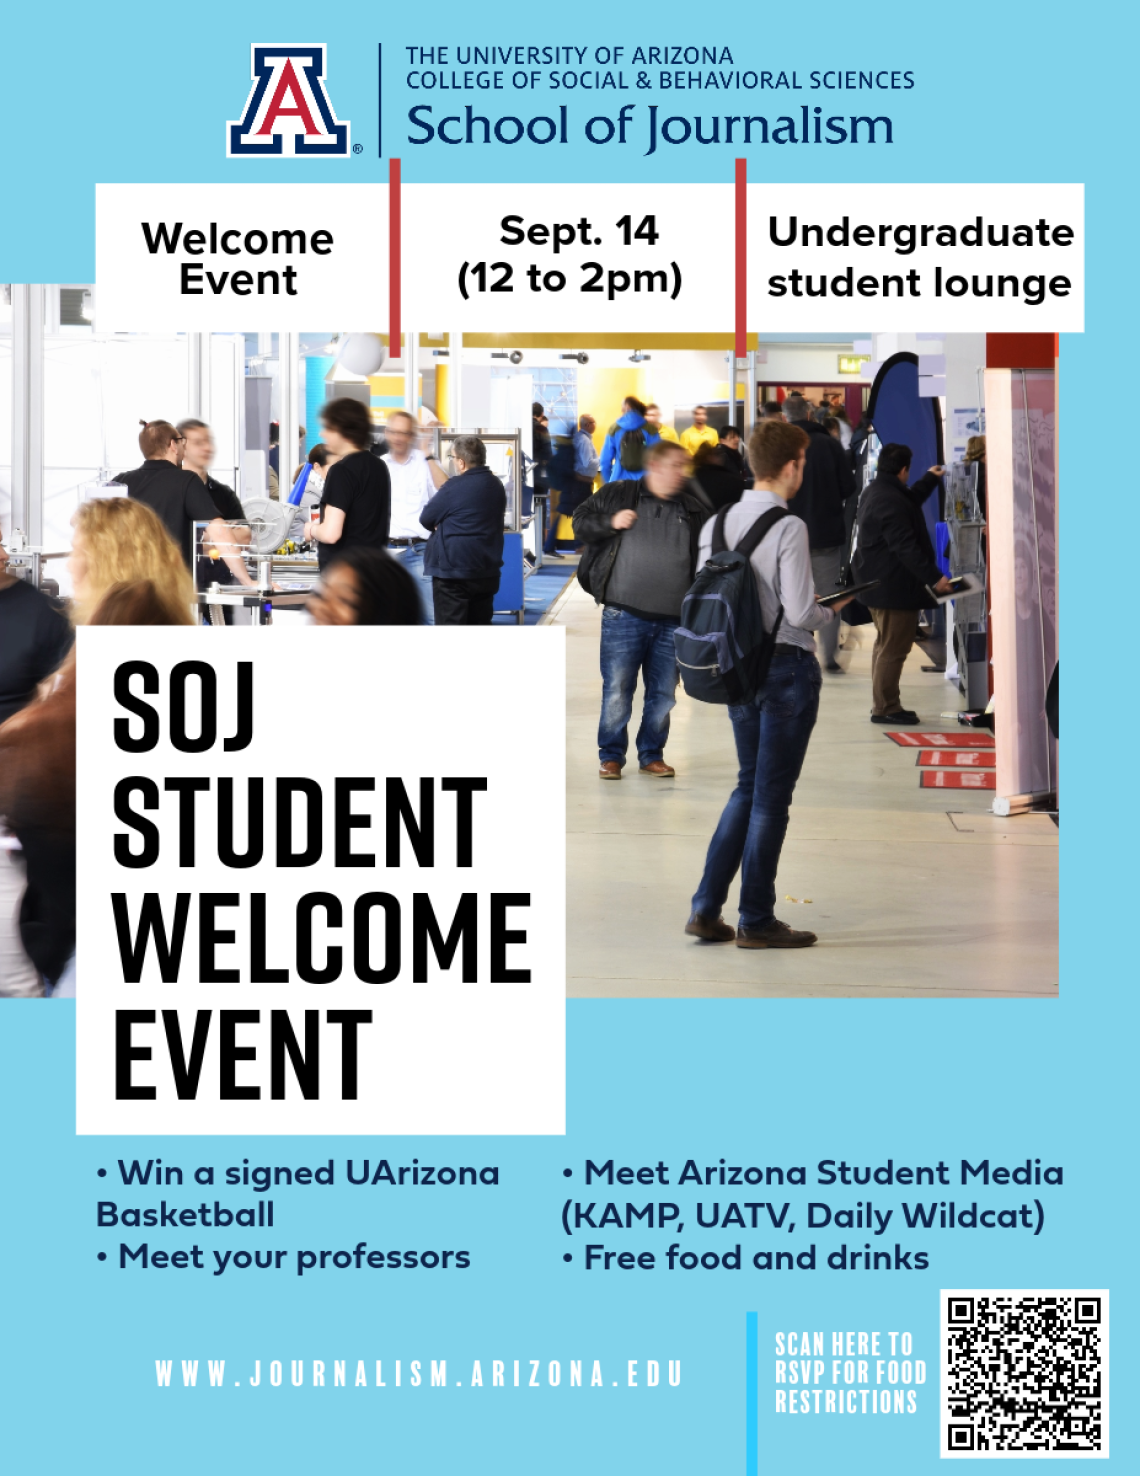 Students walk through a school hallway. Above their heads is text describing the SOJ Student Welcome Event on Thursday, Sept. 14 from 12 to 2pm.